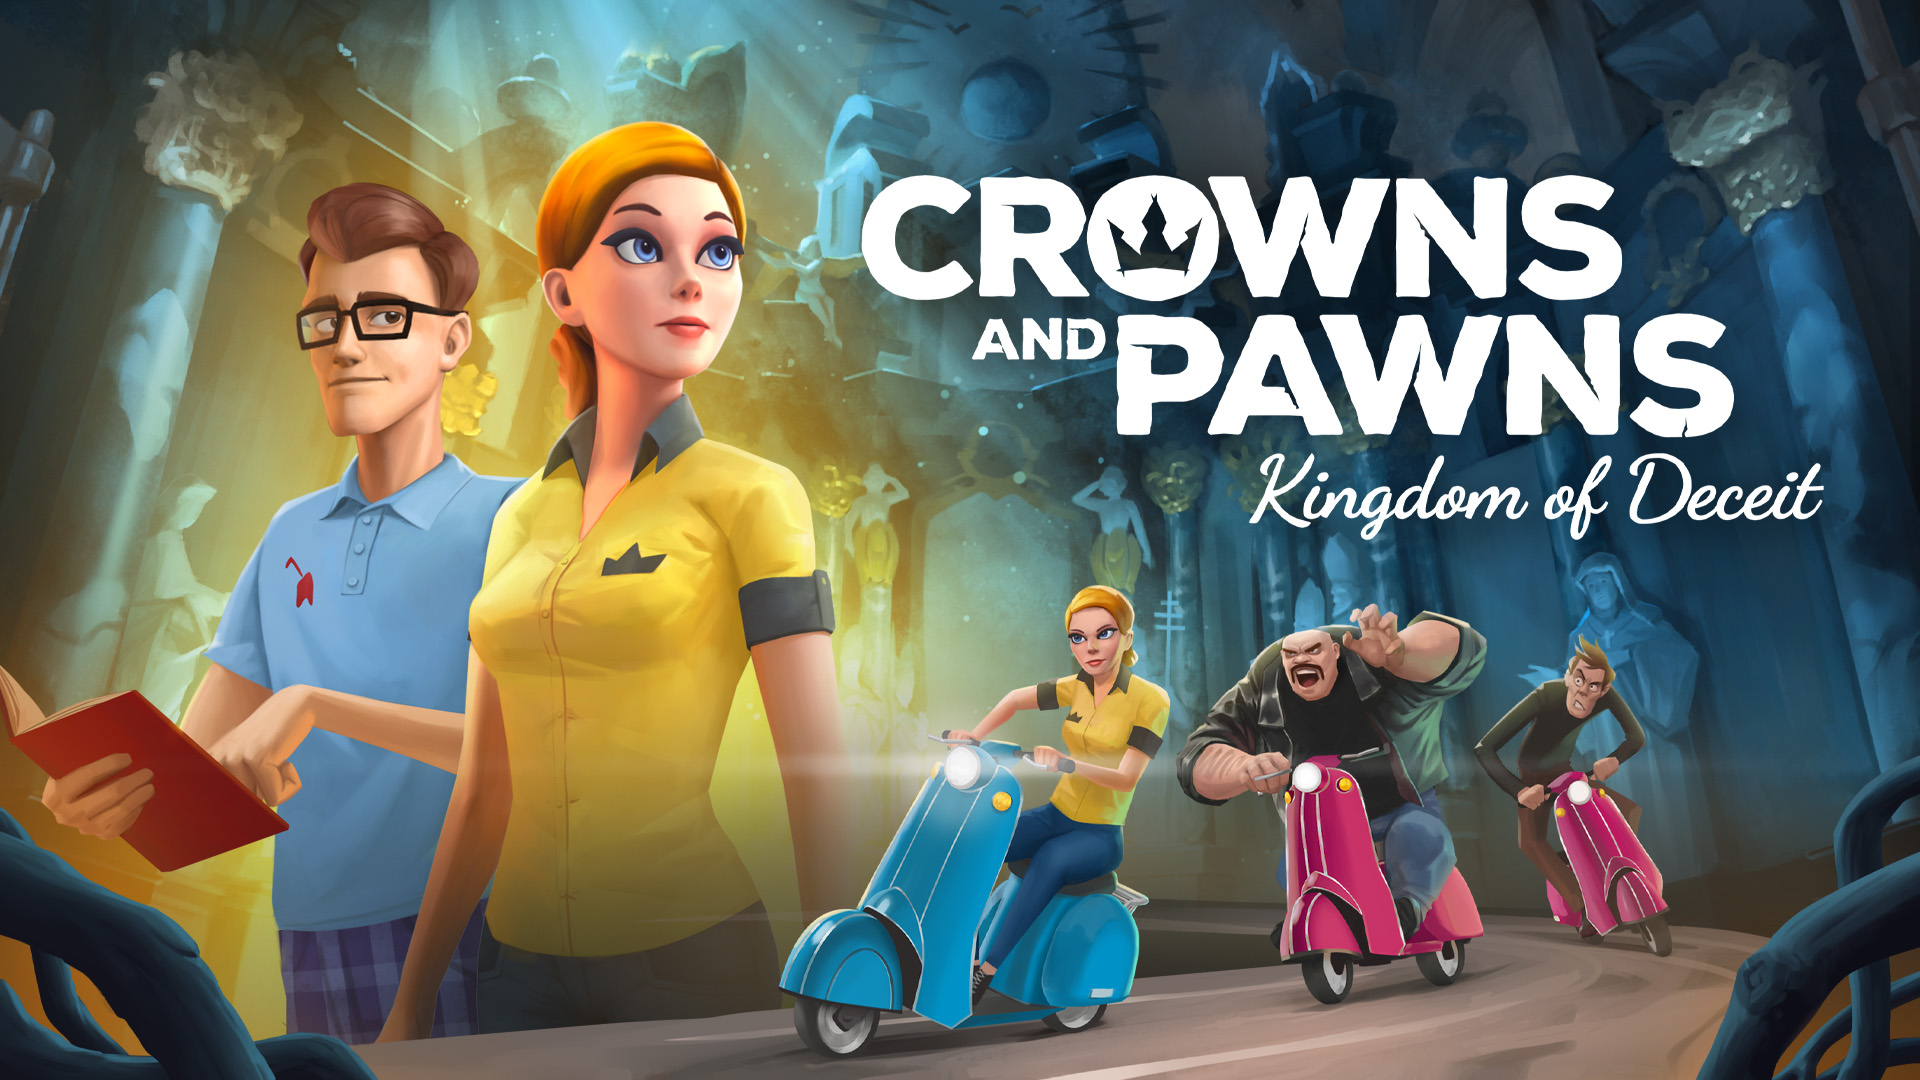 Video Game Crowns and Pawns: Kingdom of Deceit HD Wallpaper | Background Image